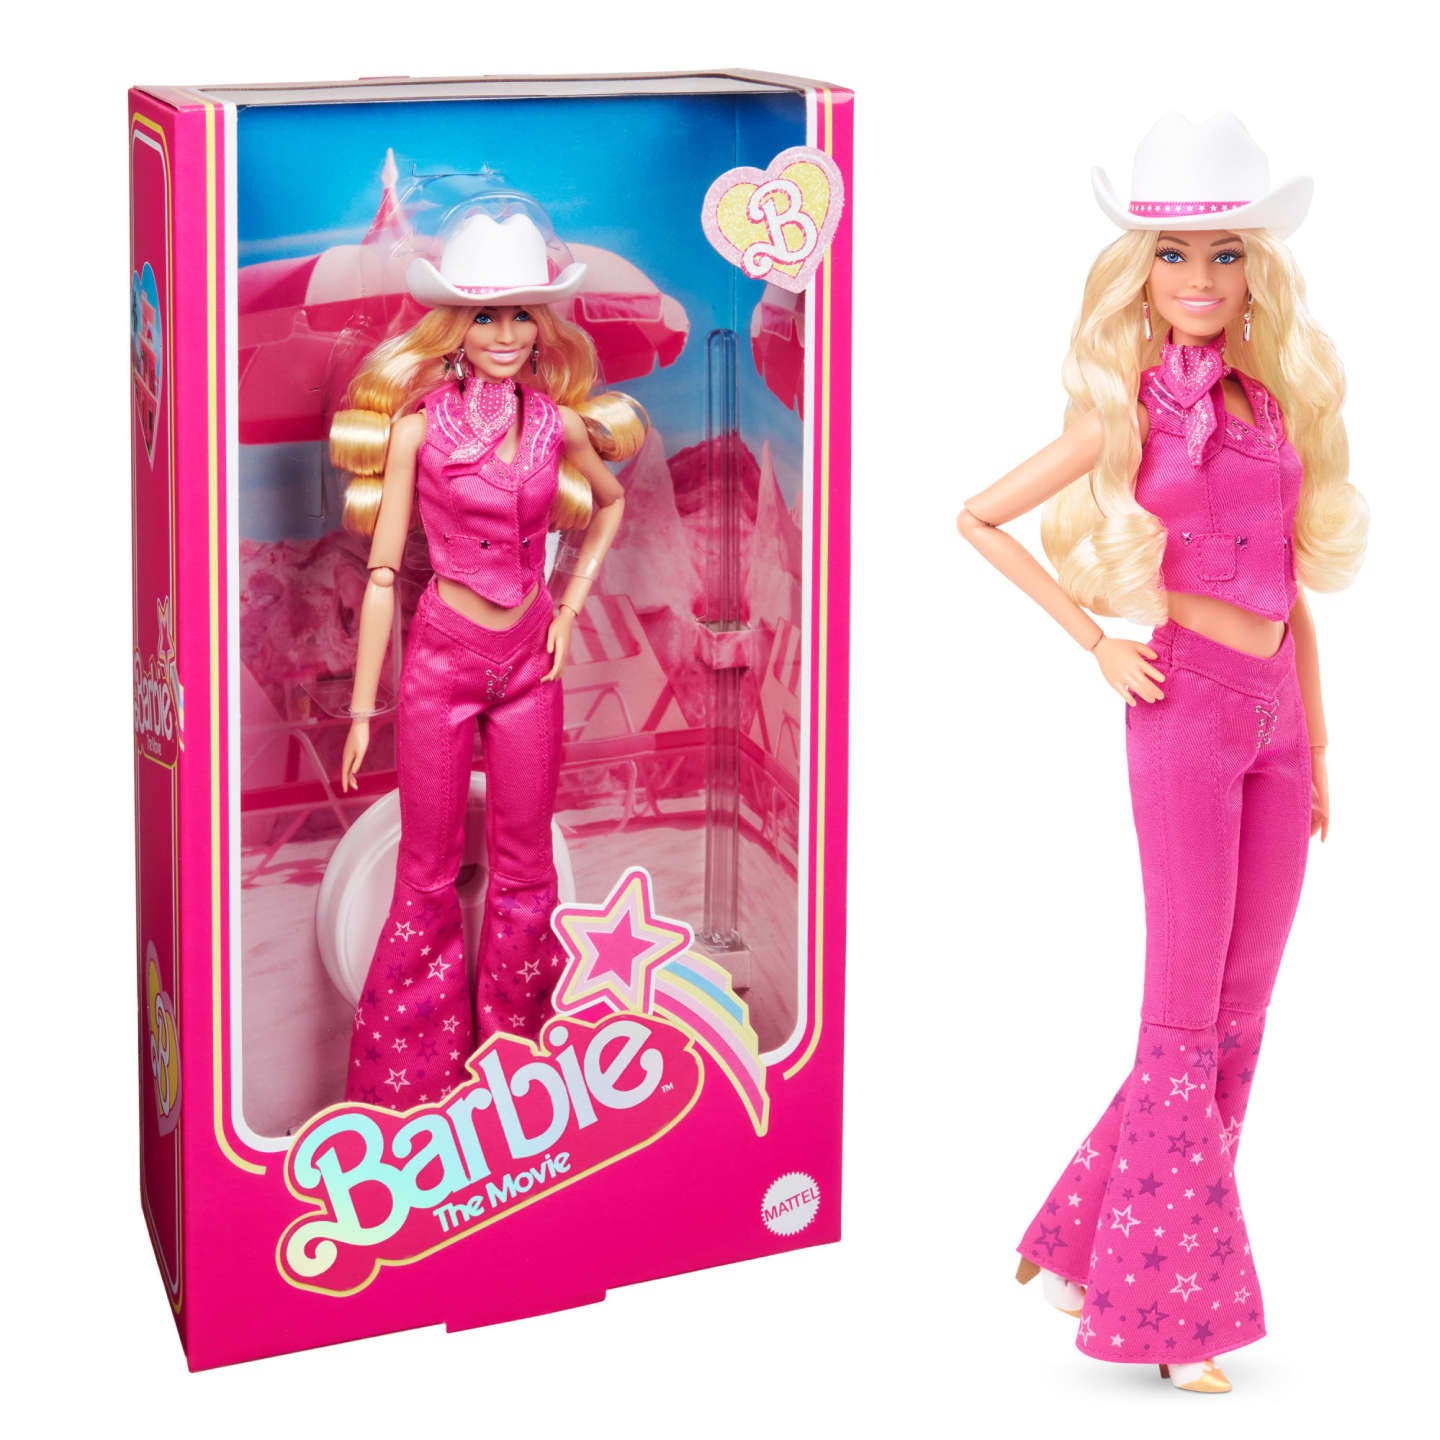 SALE Barbie The Movie Collectible Doll, Margot Robbie Gold Disco